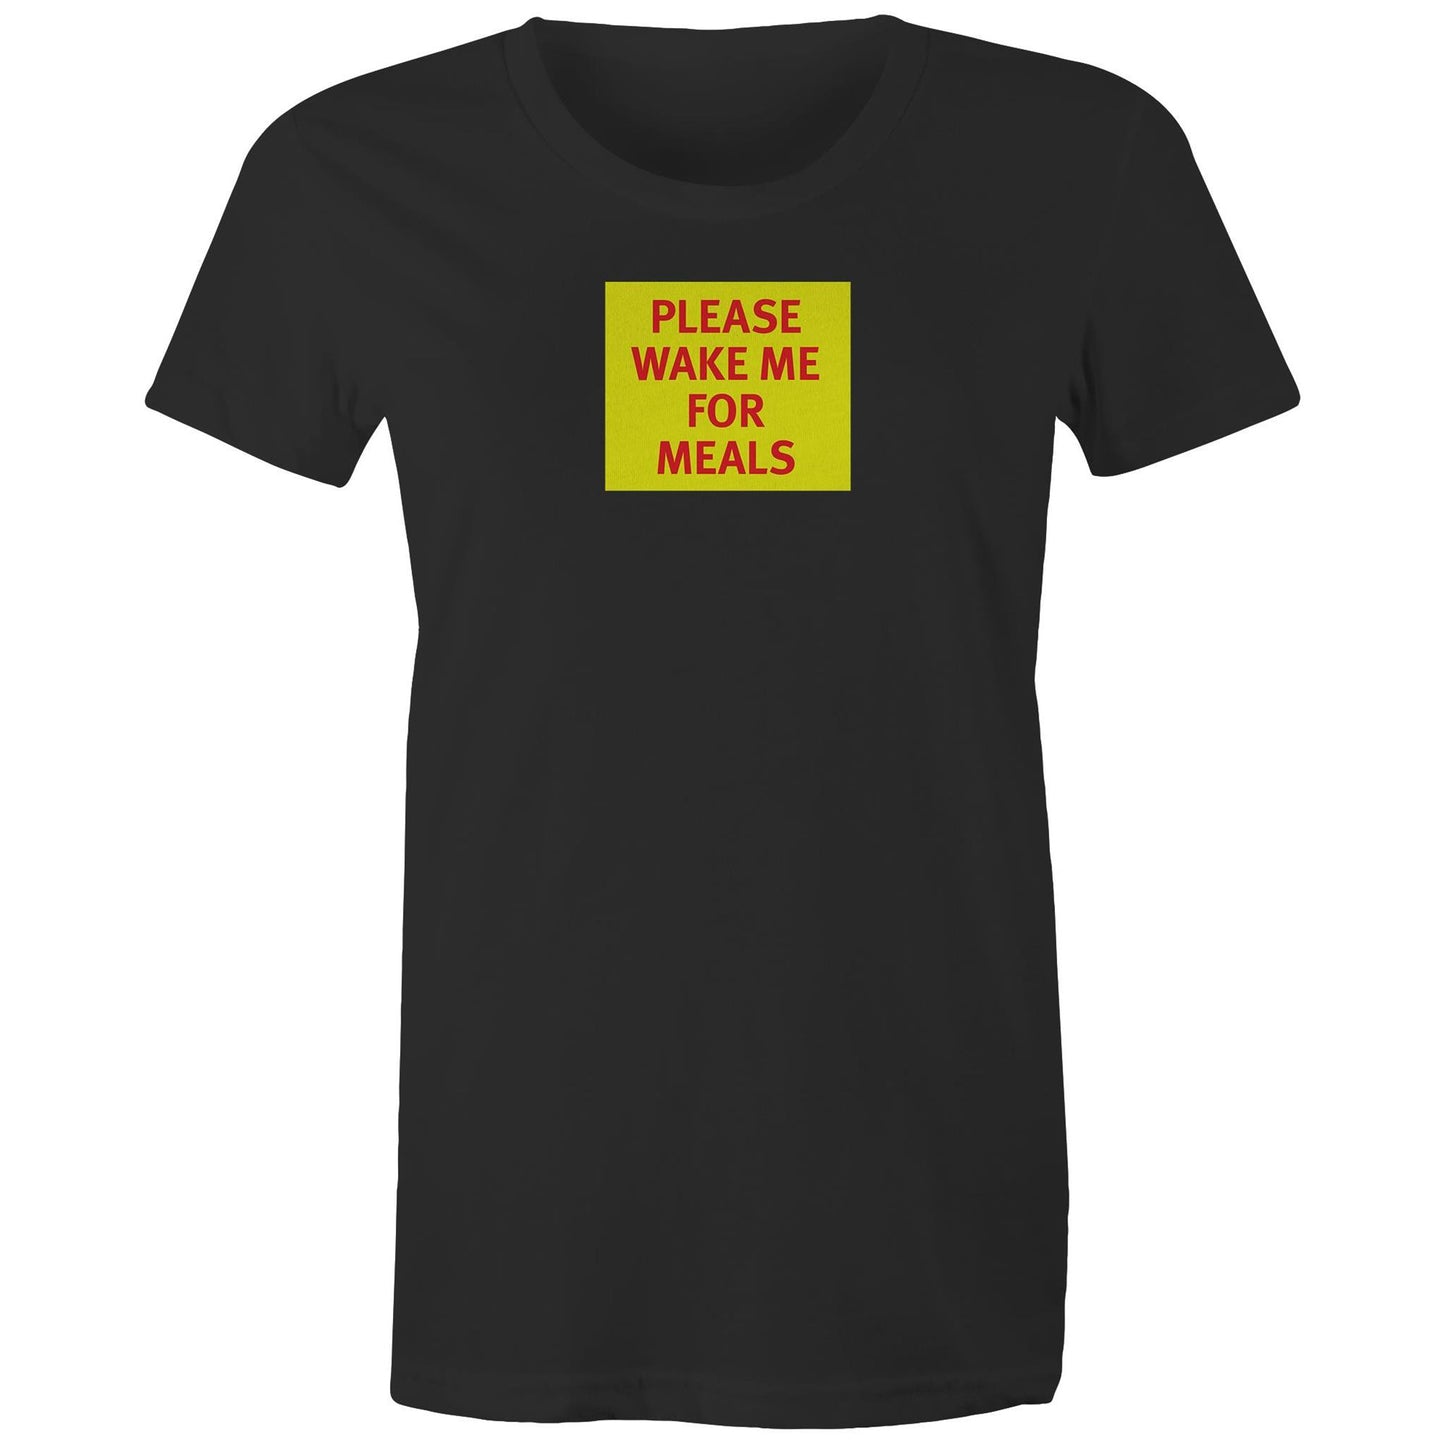 Please Wake Me for Meals T Shirts for Women